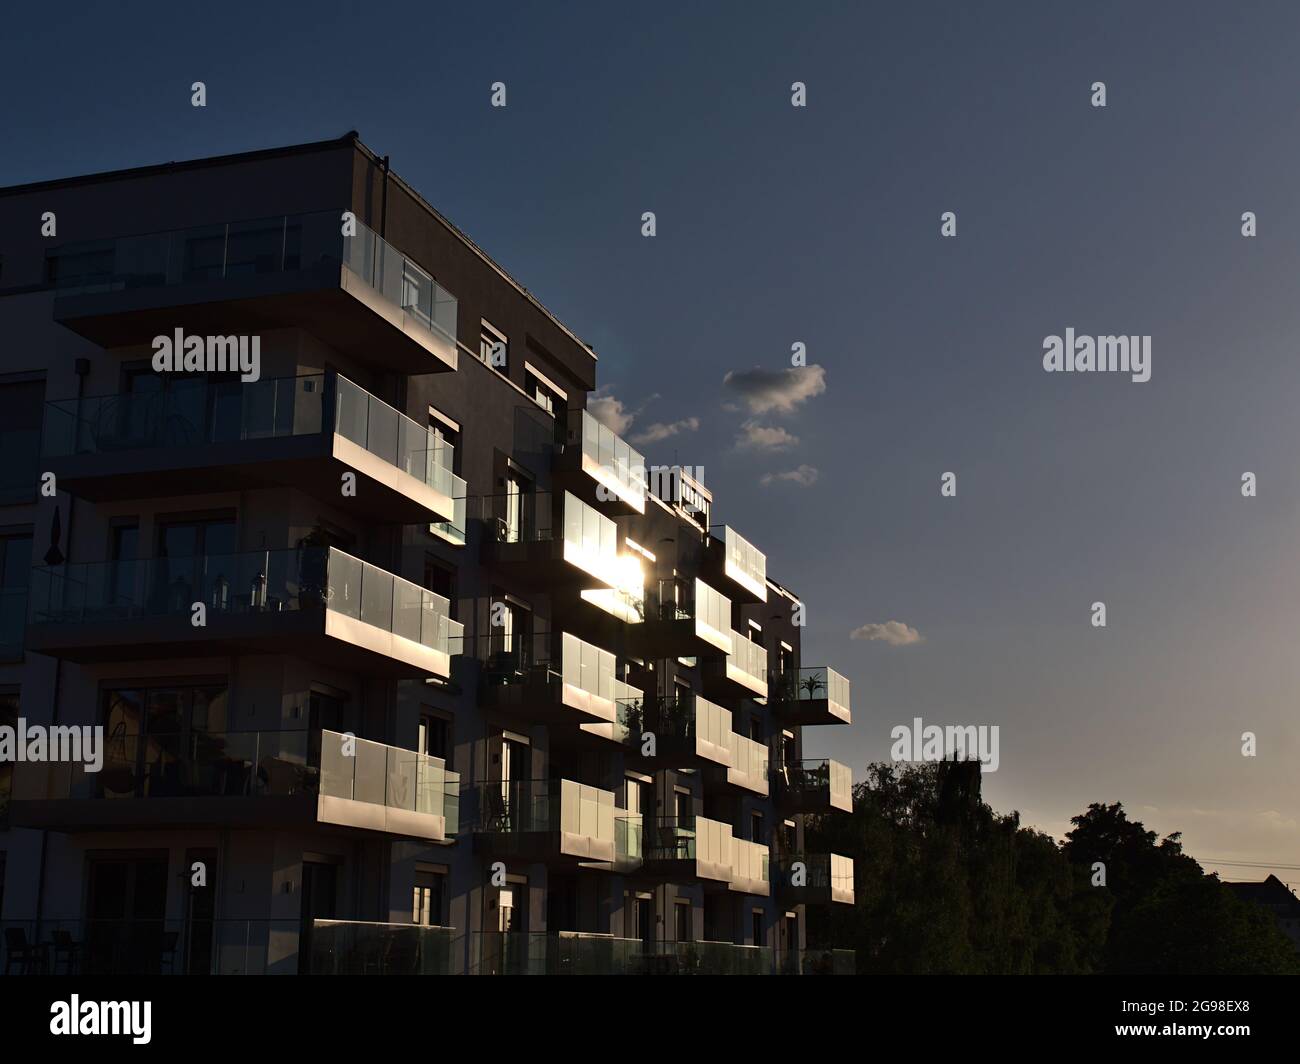 View of modern residential multi-family building with luxury apartments and evening sun reflected in the glass railings of the balconies. Stock Photo